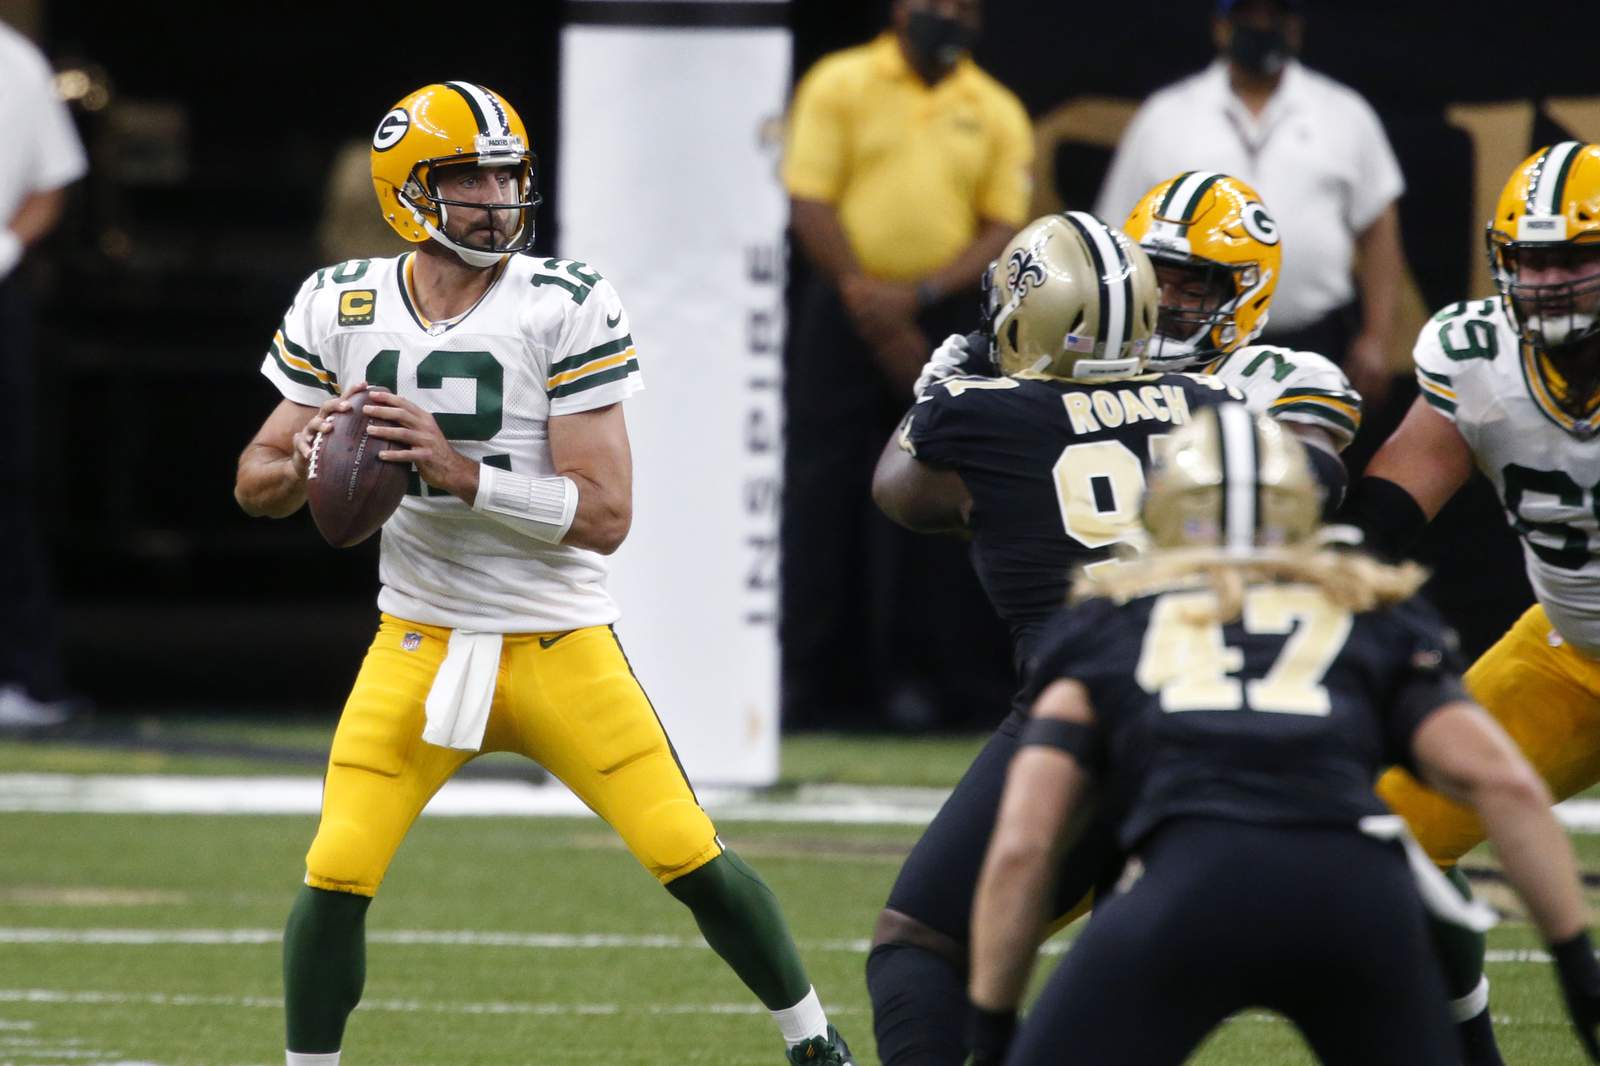 Rodgers, Packers unbeaten with 37-30 victory over Saints